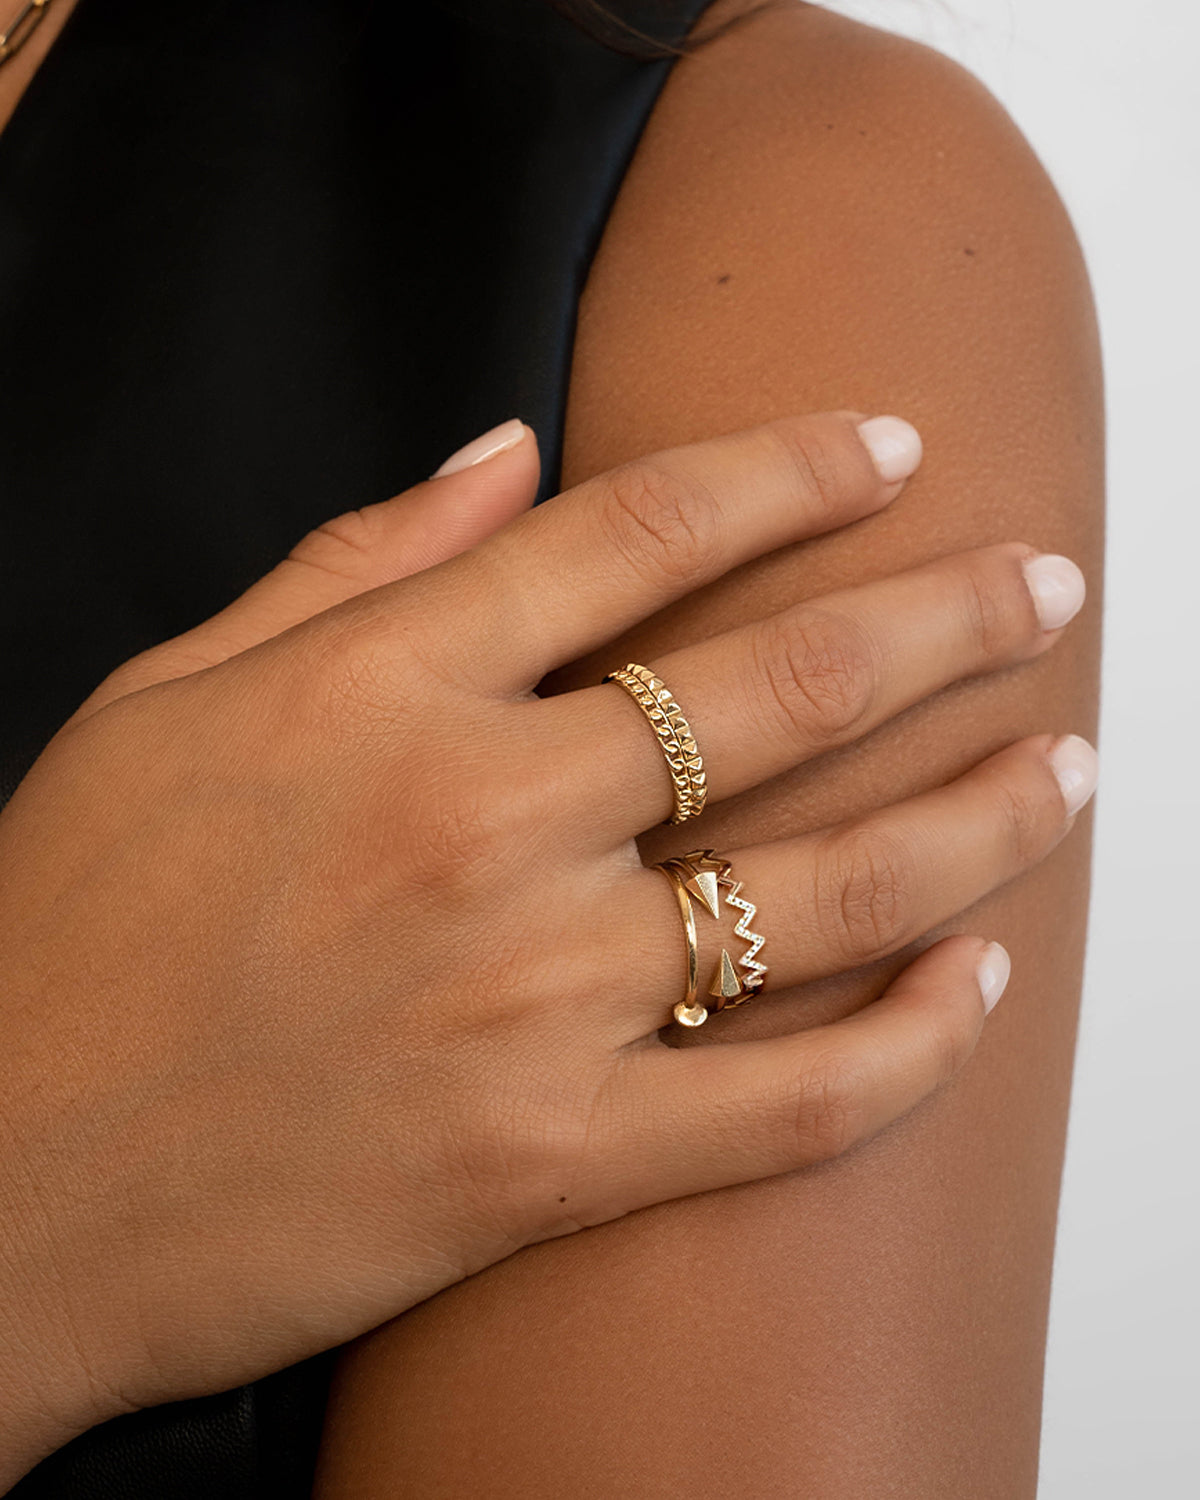 14k Gold Thin Solid Cuban Link Ring - Zoe Lev Jewelry